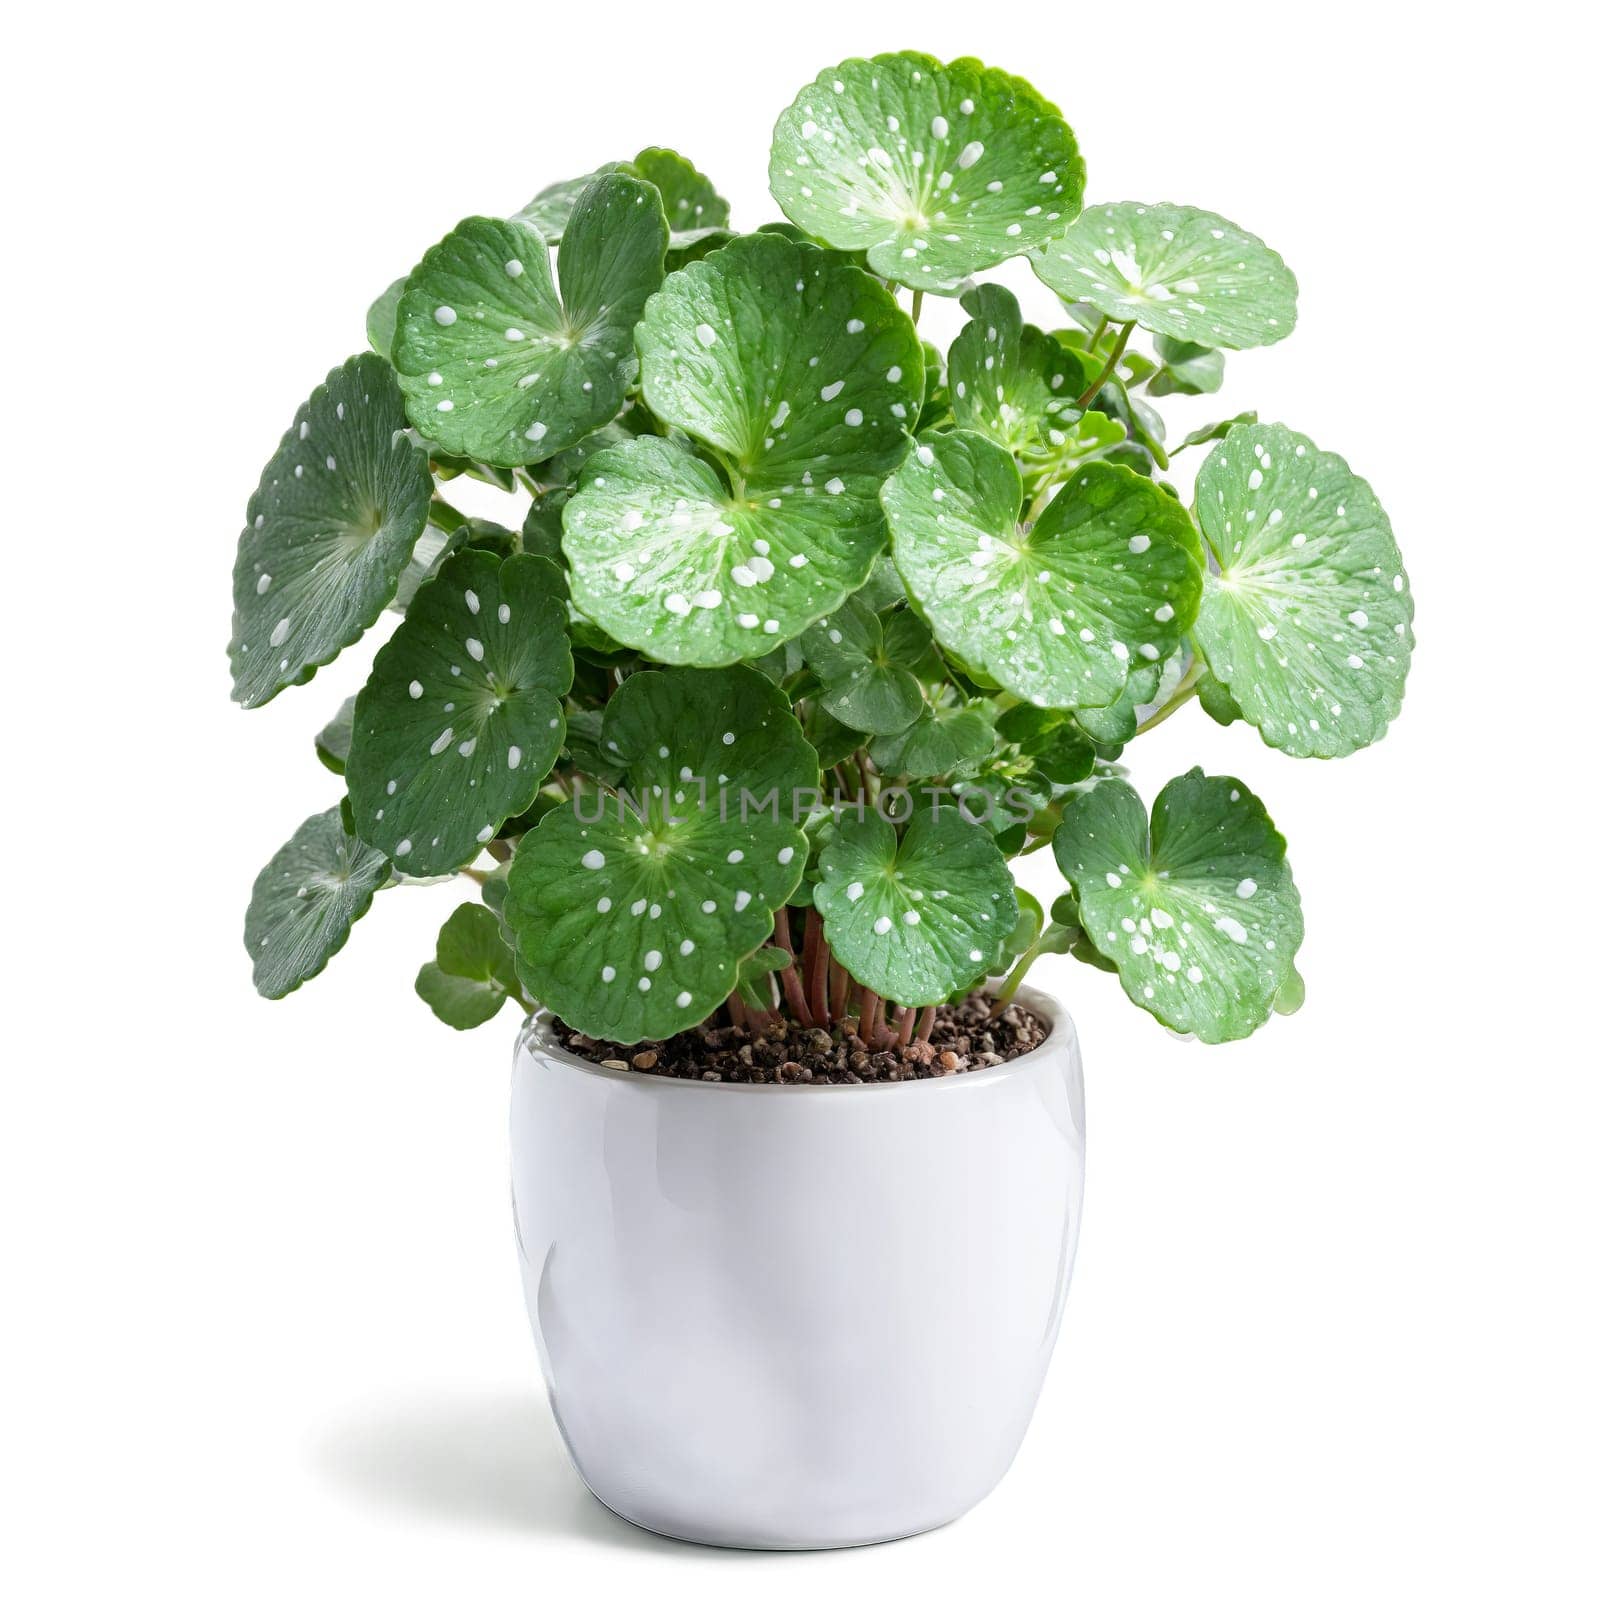 Pilea Cadierei small green leaves with silver spots growing in a compact arrangement in a by panophotograph